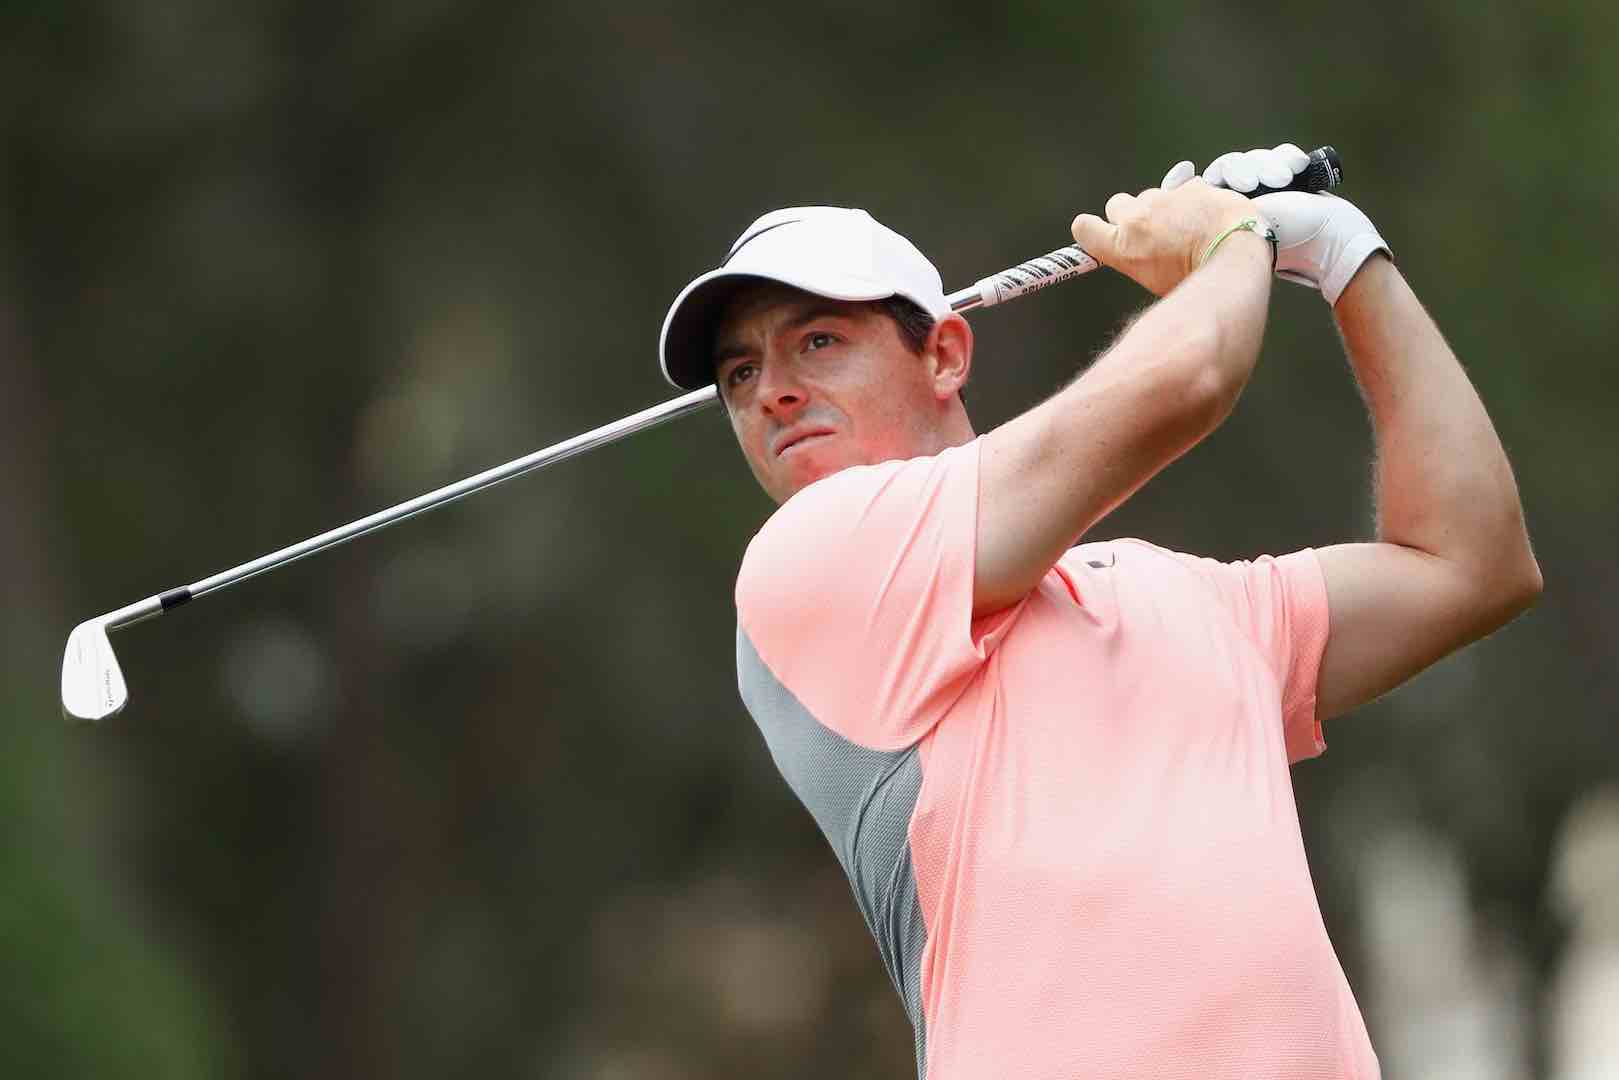 Rory McIlroy has confirmed that he will play the US Open at Erin Hills in W...